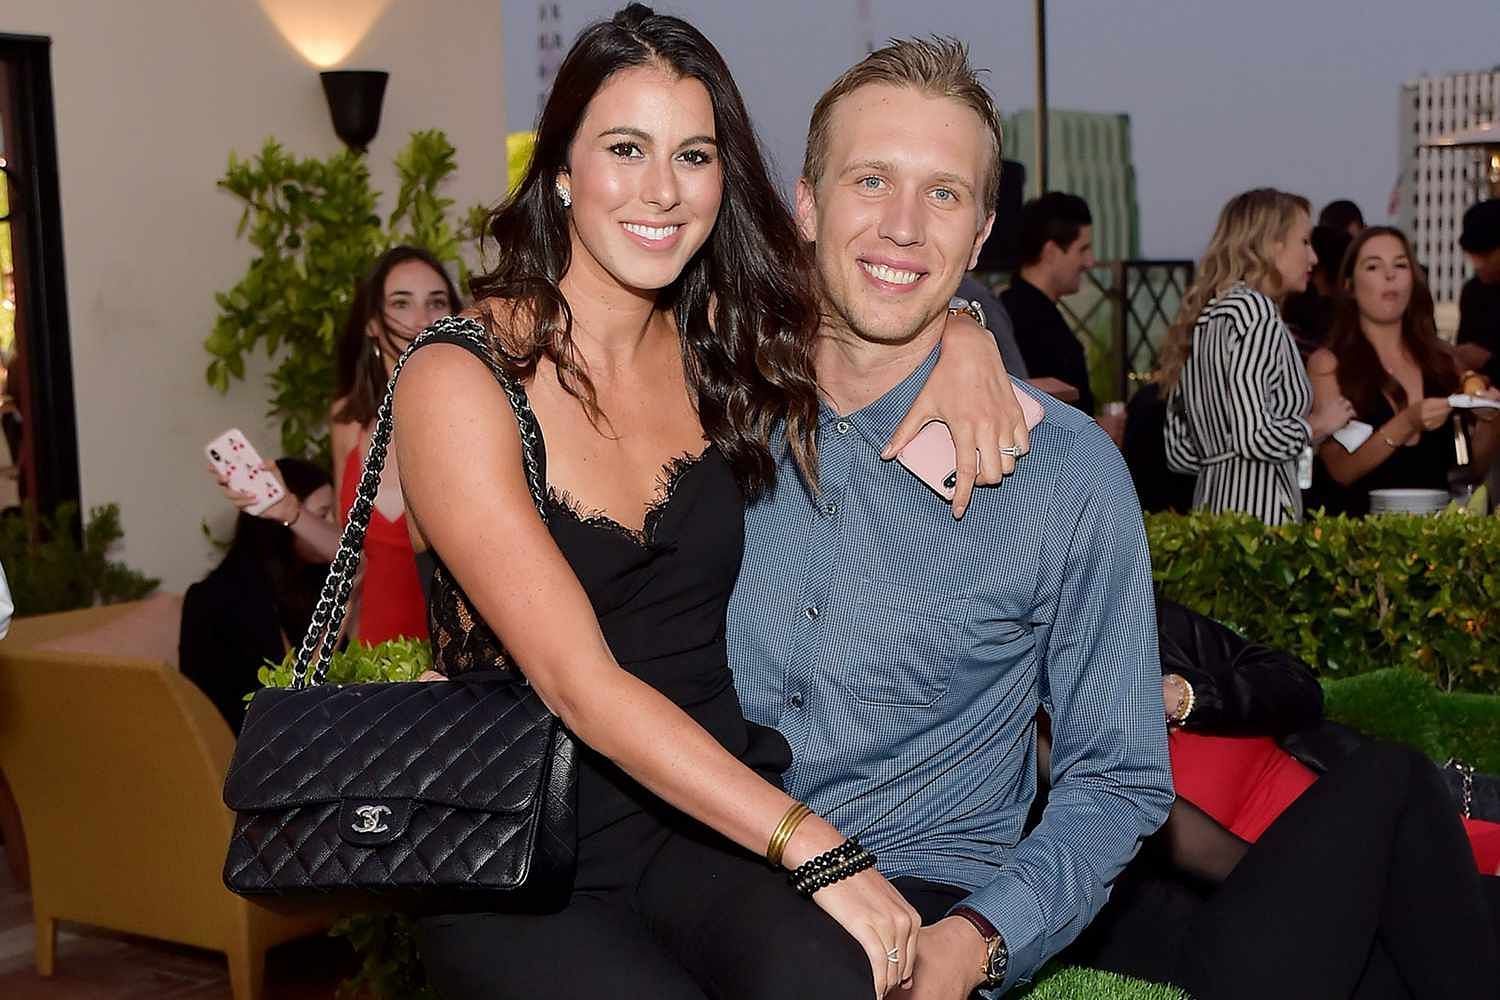 Nick Foles has been happily married to his wife Tori since 